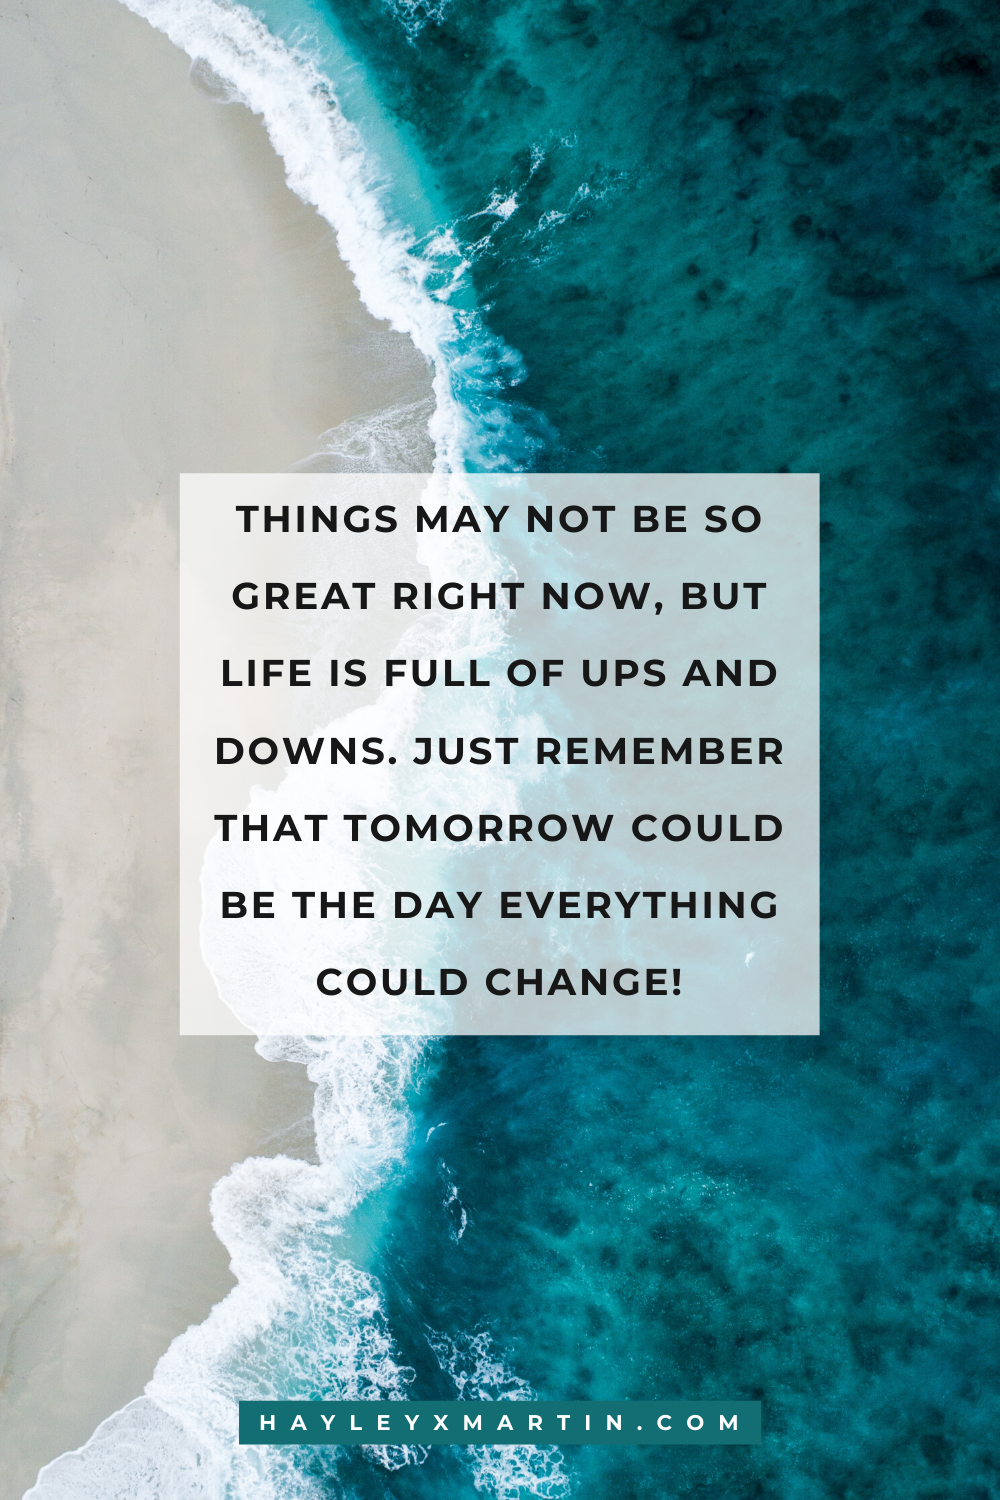 just remember that tomorrow could be the day everything could change | hayleyxmartin